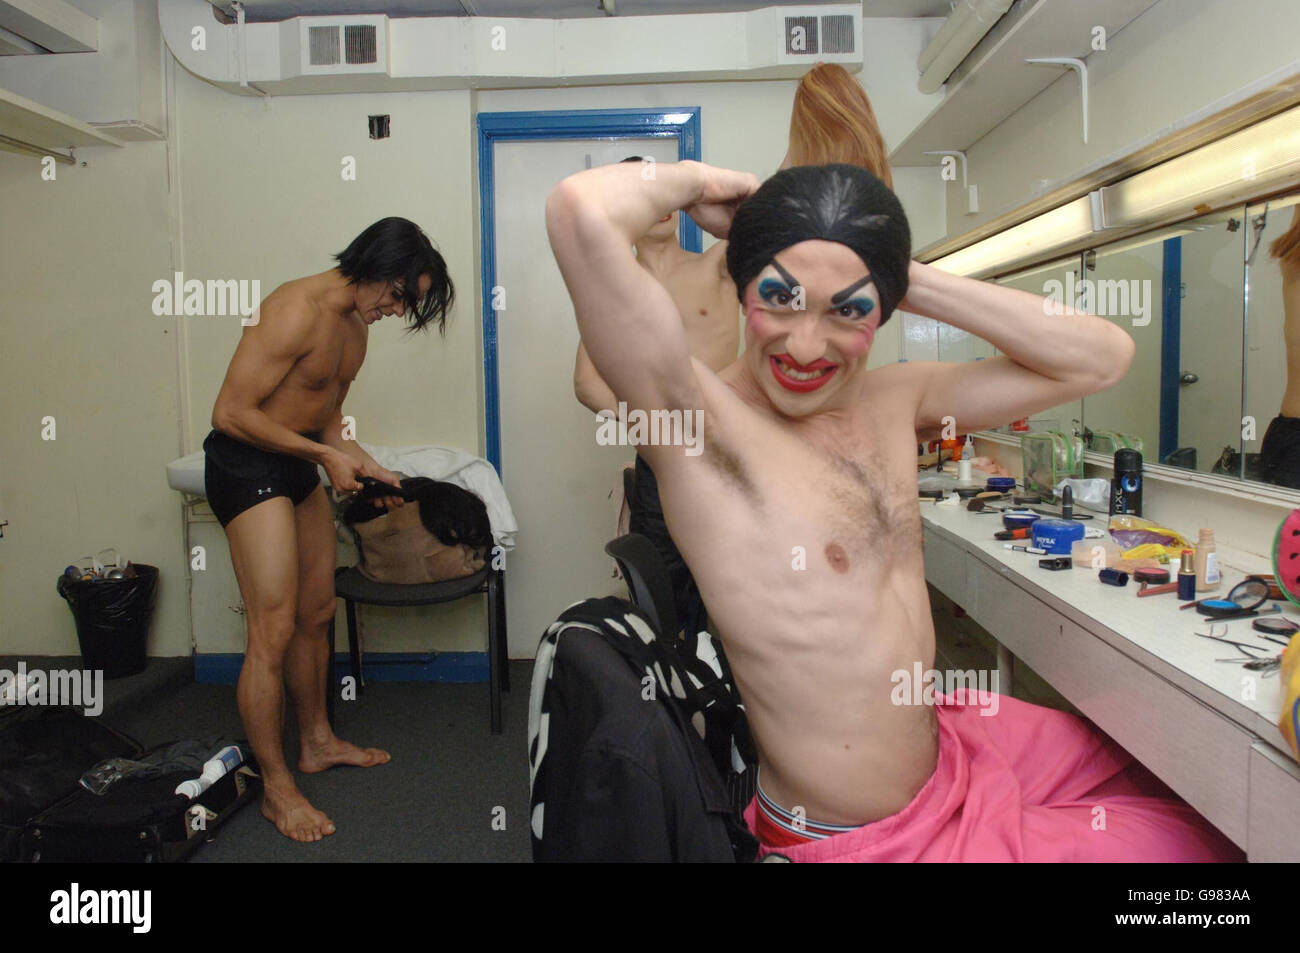 Lionel Droguet (AKA 'Irina Bakpakova/Vladimir Legupski') prepares for a dress rehearsal with 'Les Ballets Trockadero de Monte Carlo', an all-male ballet company from New York City who are performing their trademark parodies of classical ballets in London for the first time in five years, at the Peacock Theatre, central London, Tuesday 21 March 2006. PRESS ASSOCIATION Photo. Photo credit should read: Steve Parsons/PA Stock Photo